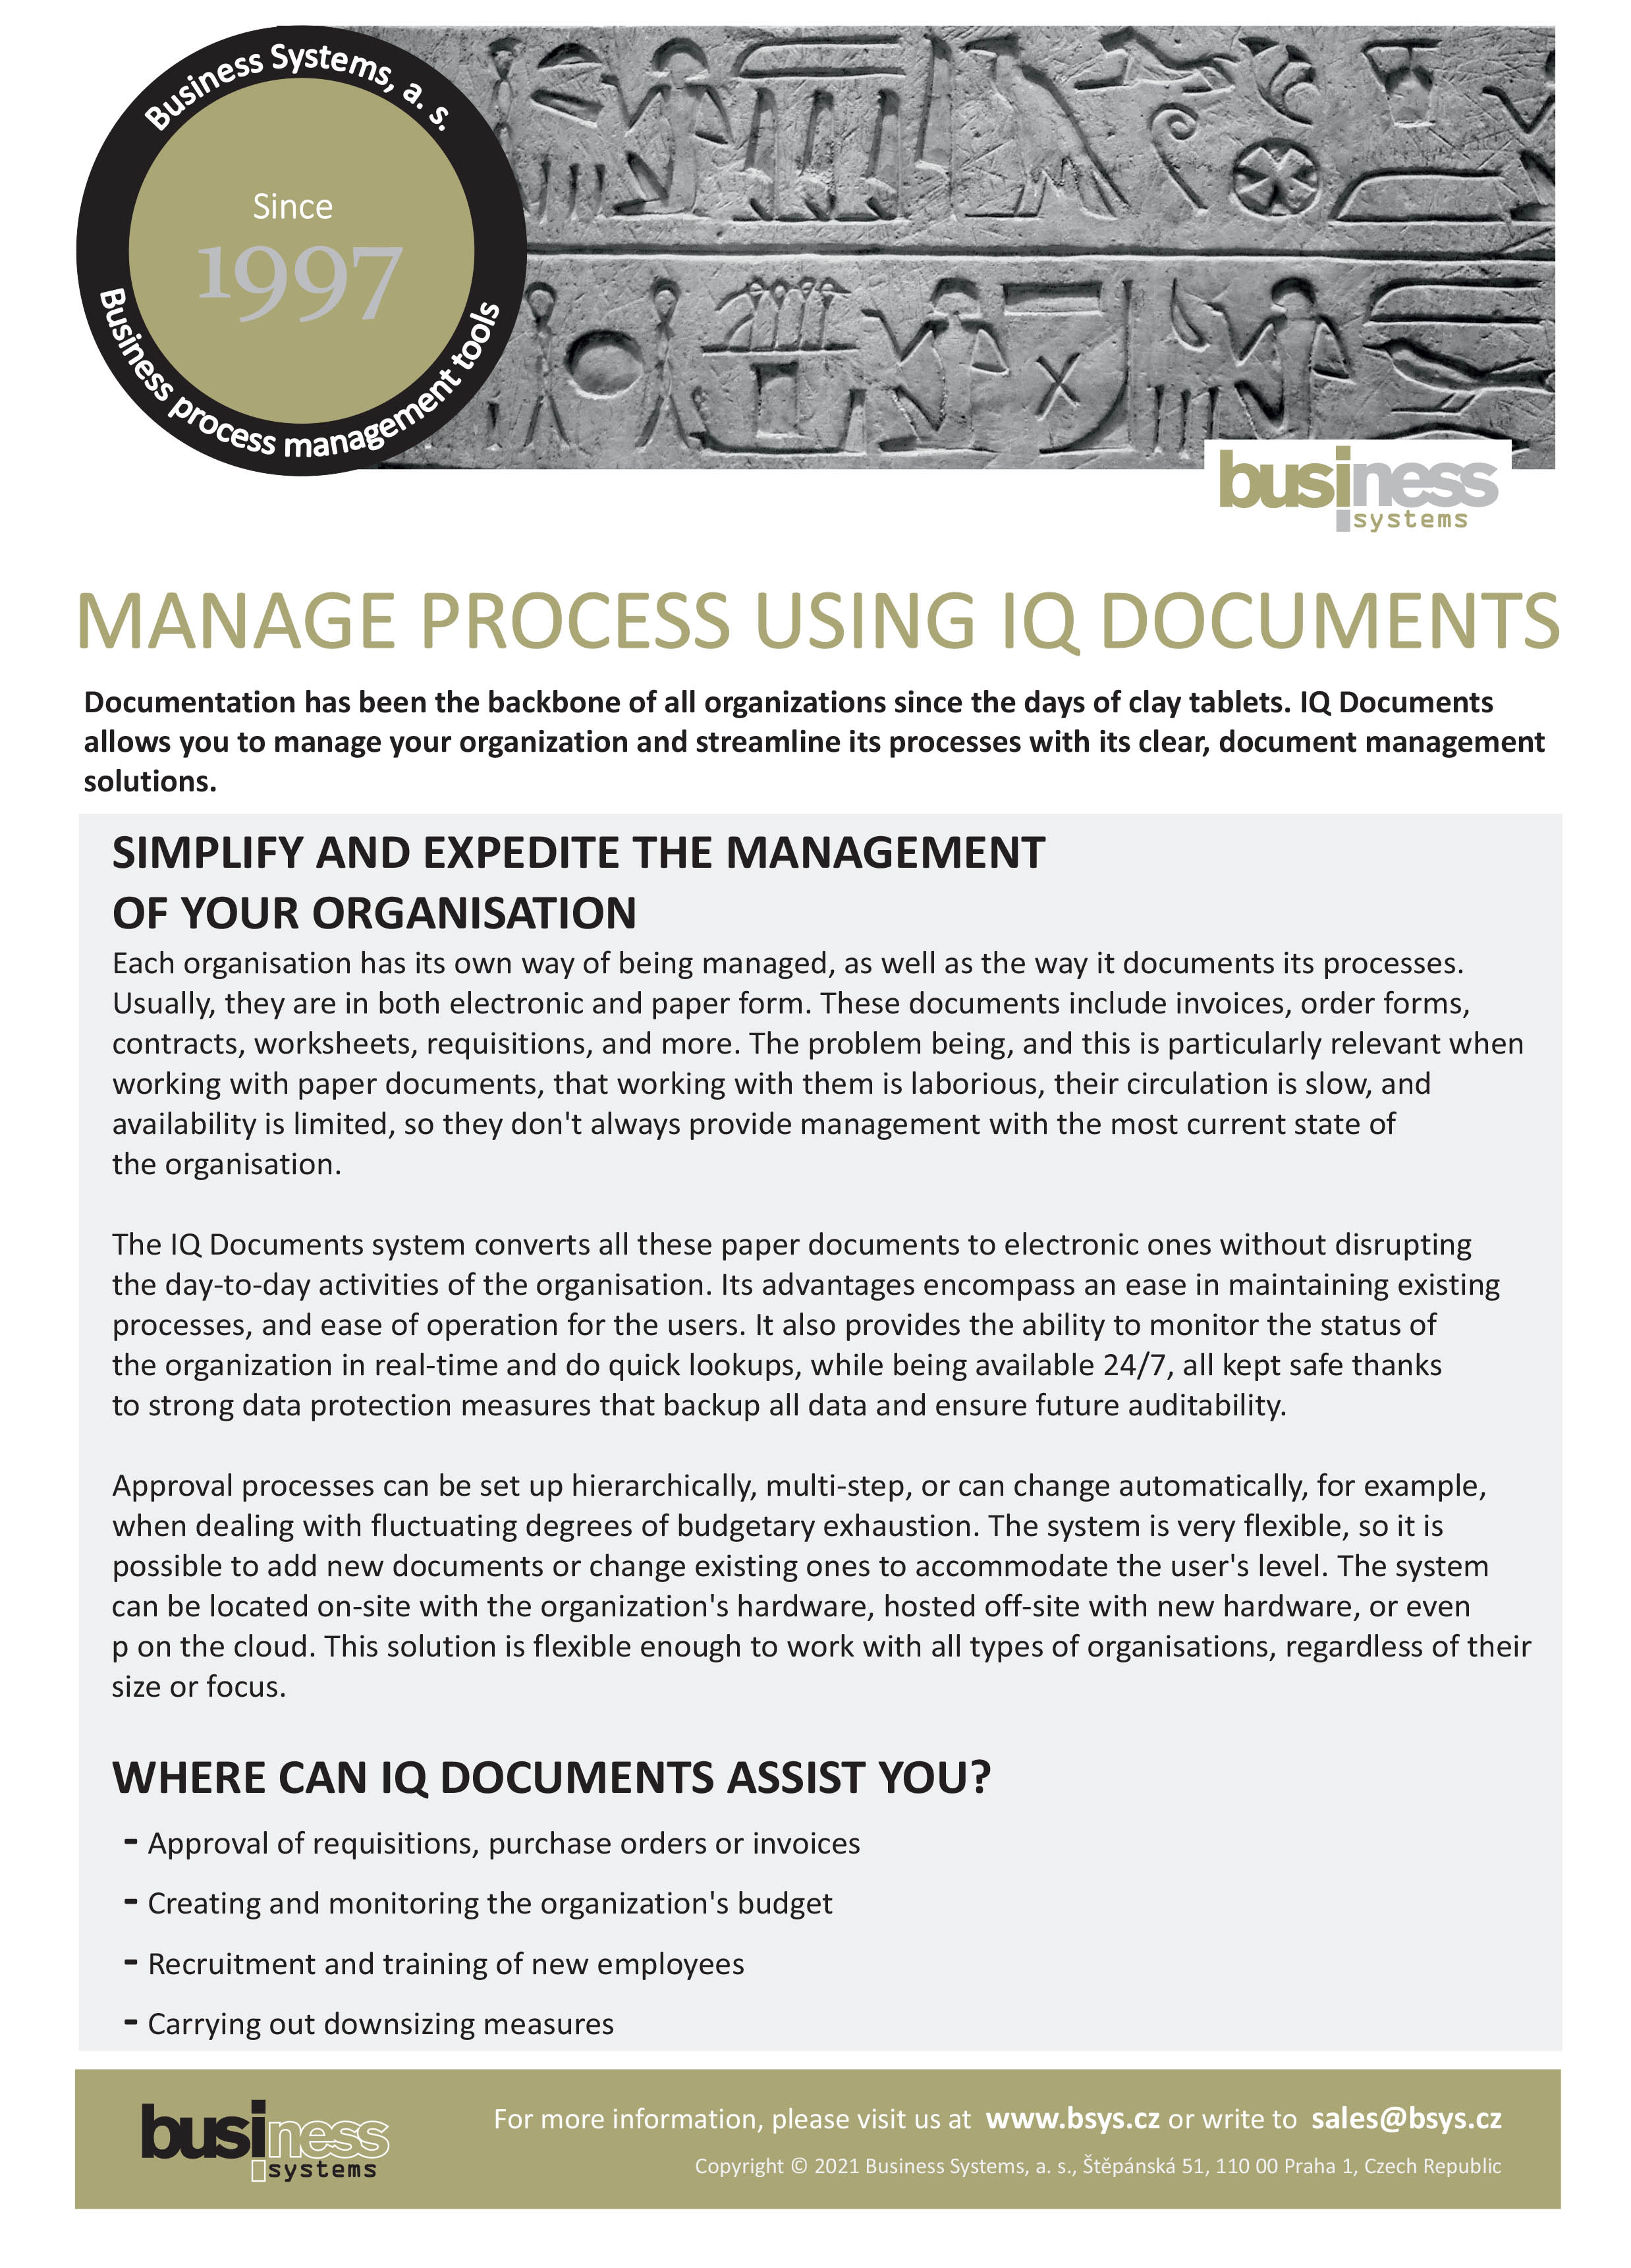 IQ Documents - care for company documents 